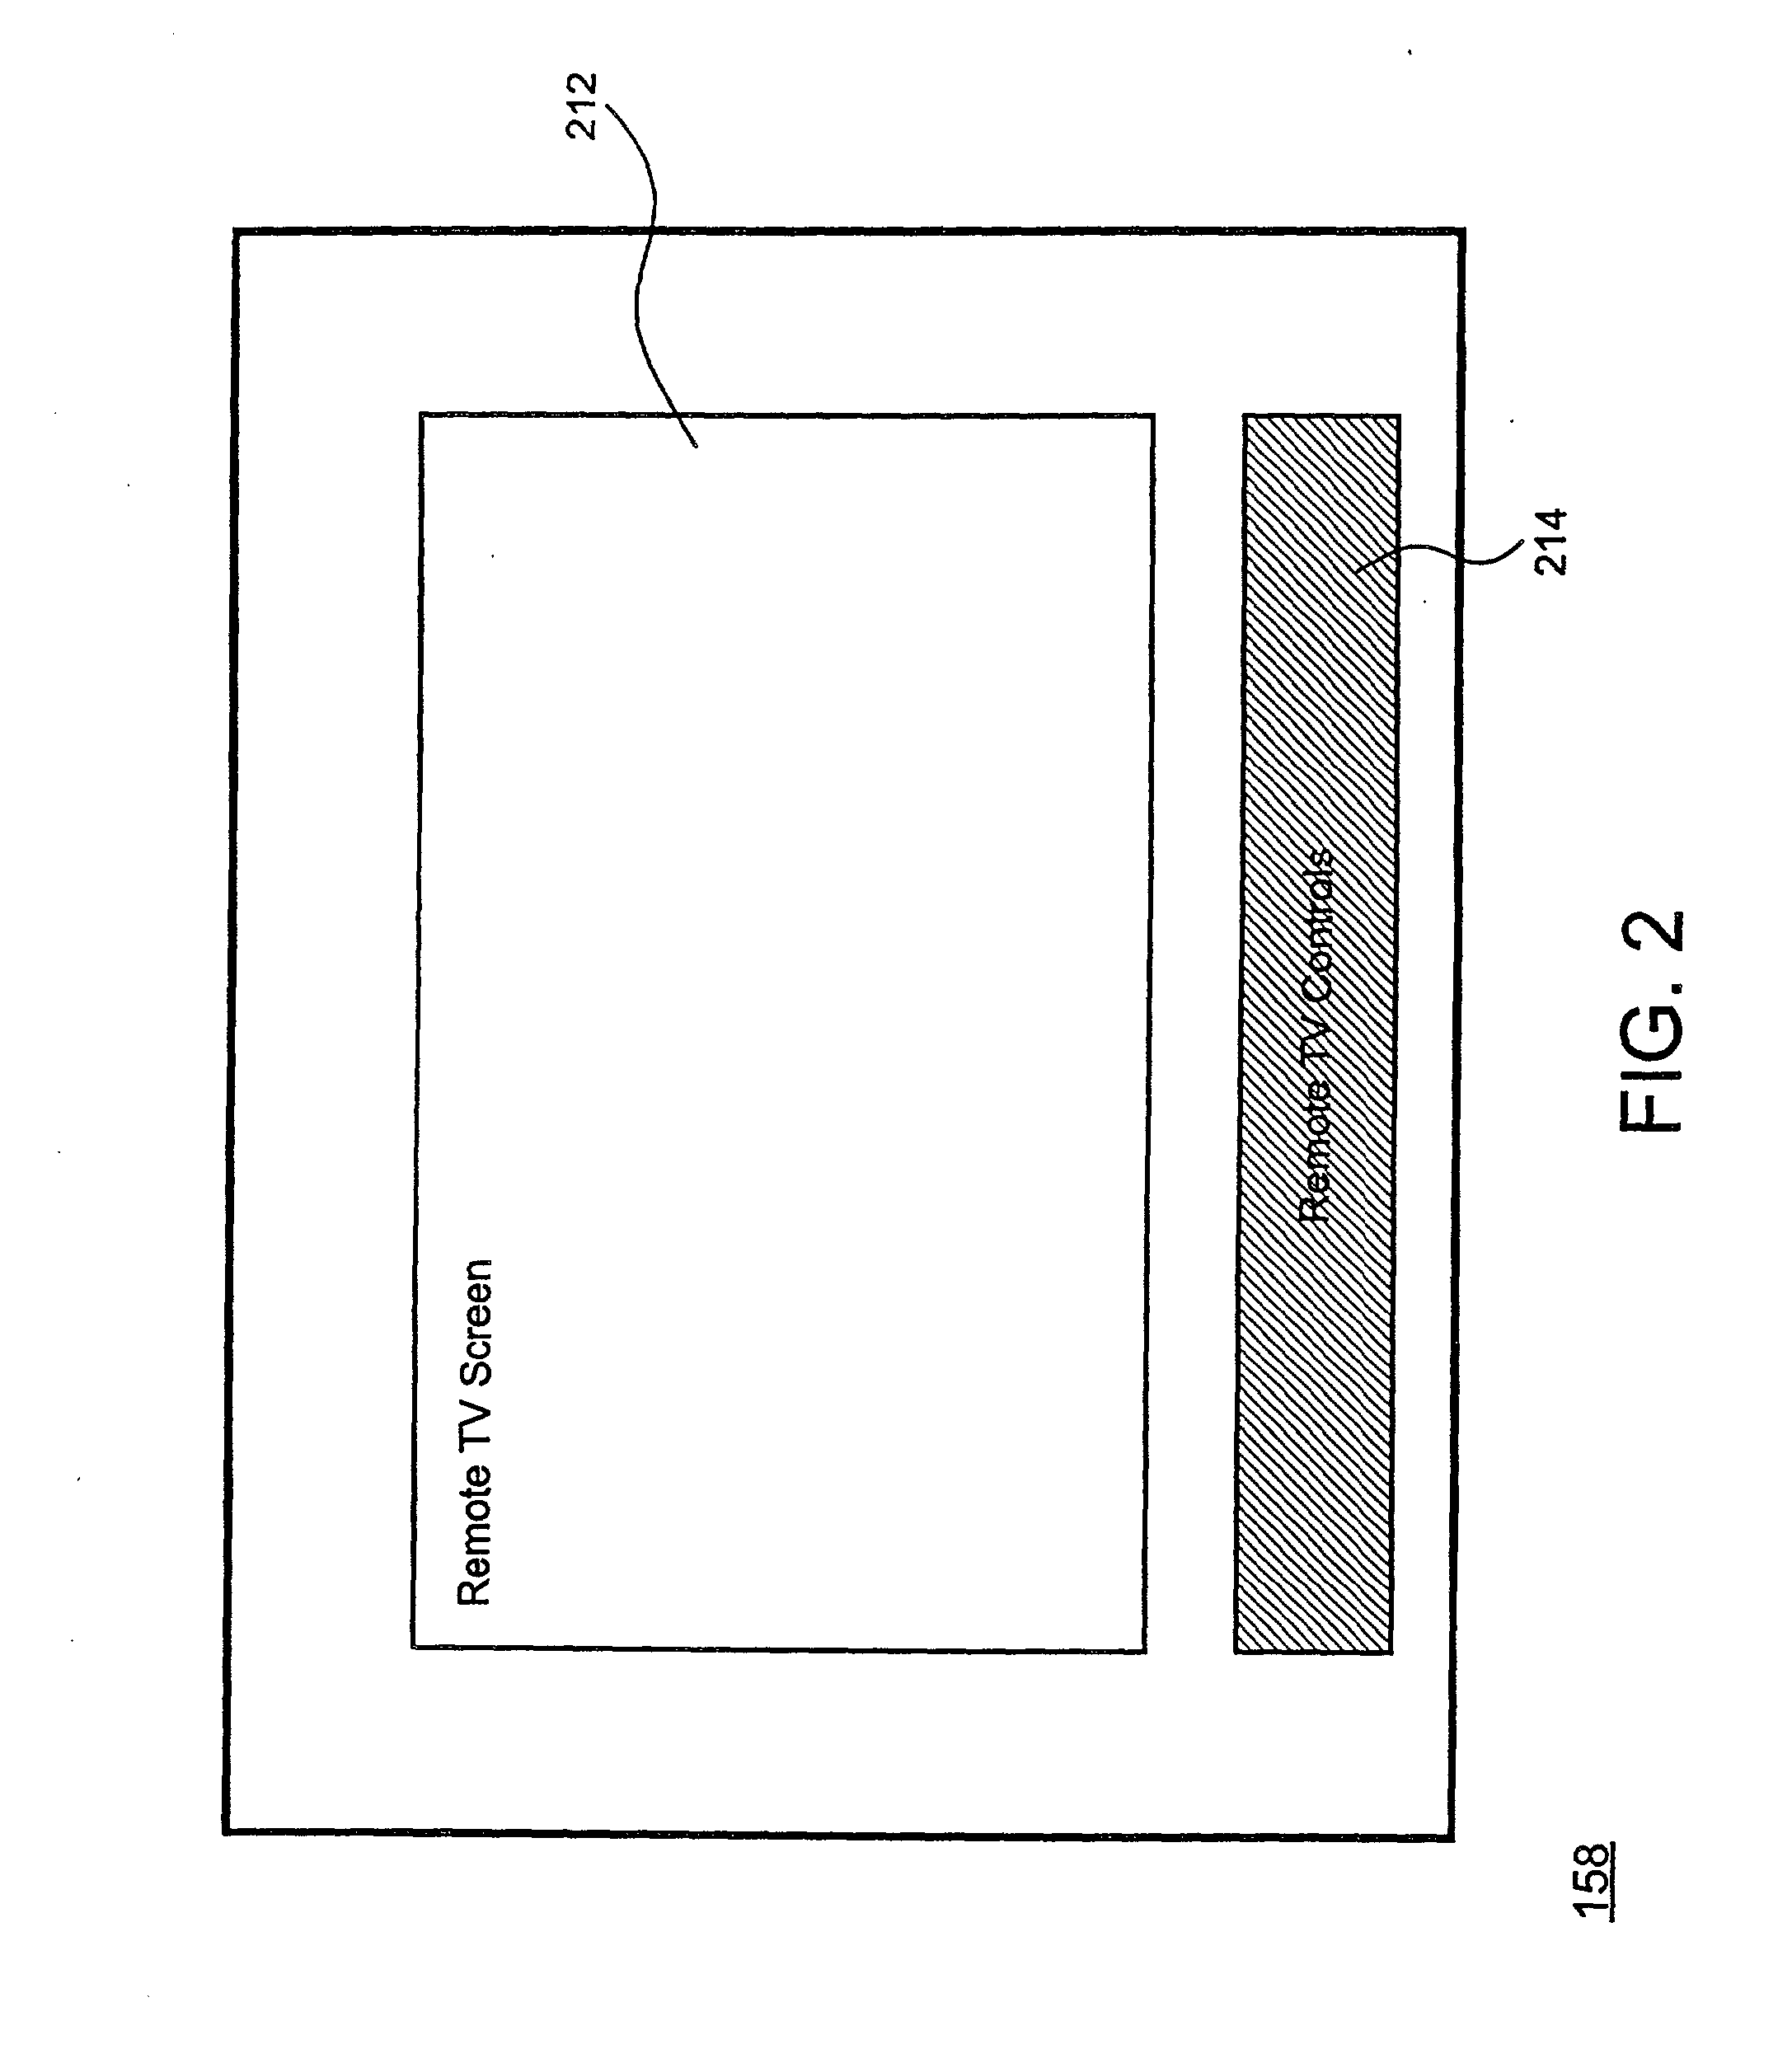 Apparatus and method for effectively implementing a wireless television system